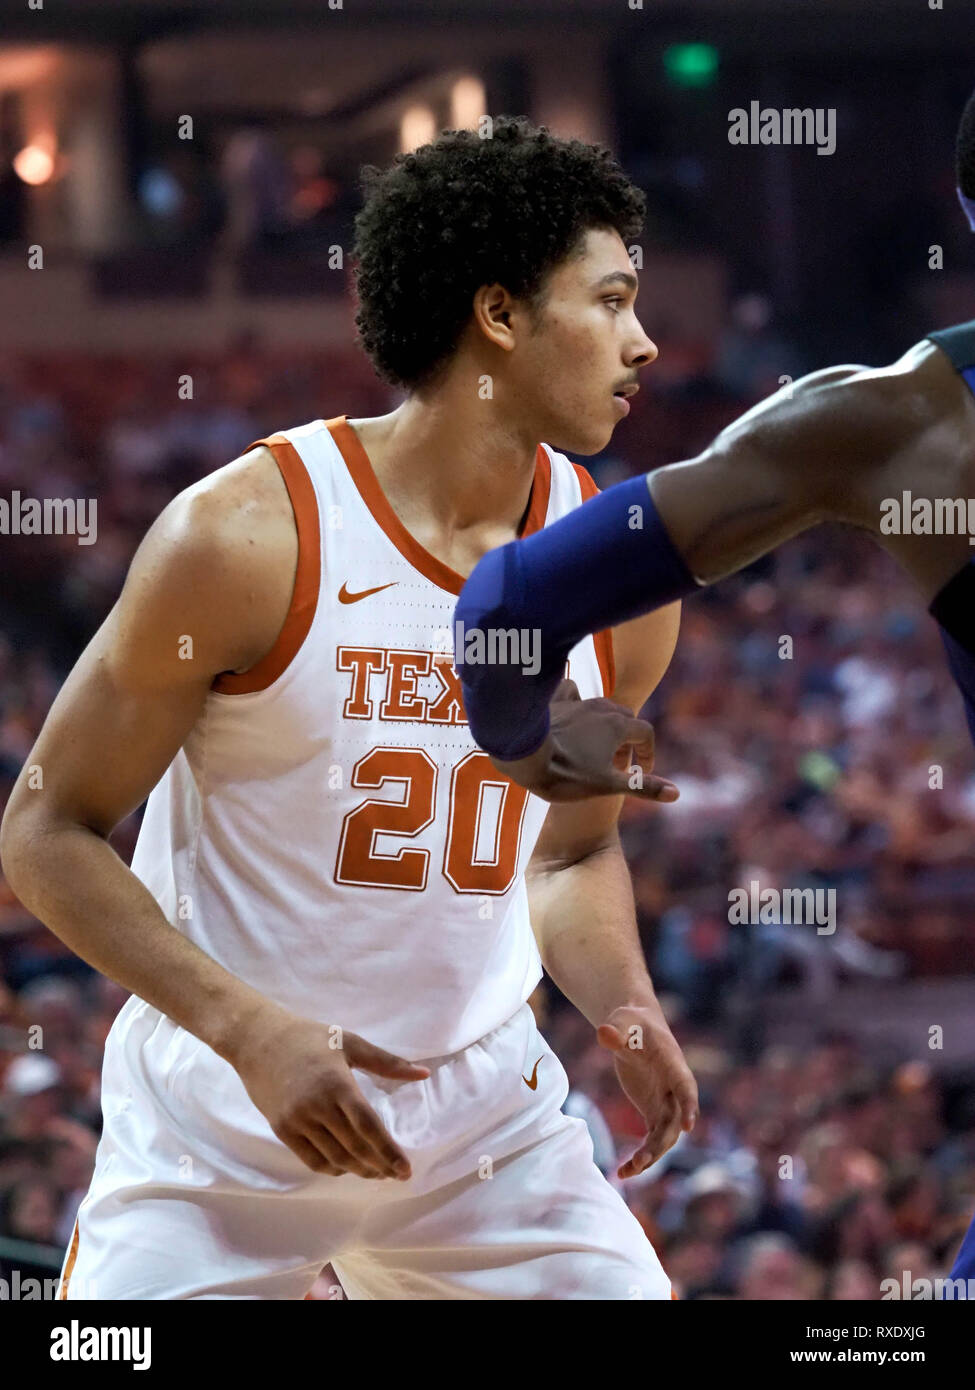 March 9, 2019. Jericho Sims #20 of the Texas Longhorns in action vs the TCU Horned Frogs at the Frank Erwin Center in Austin Texas. TCU beats Texas 69-54.Robert Backman/Cal Sport Media. Stock Photo